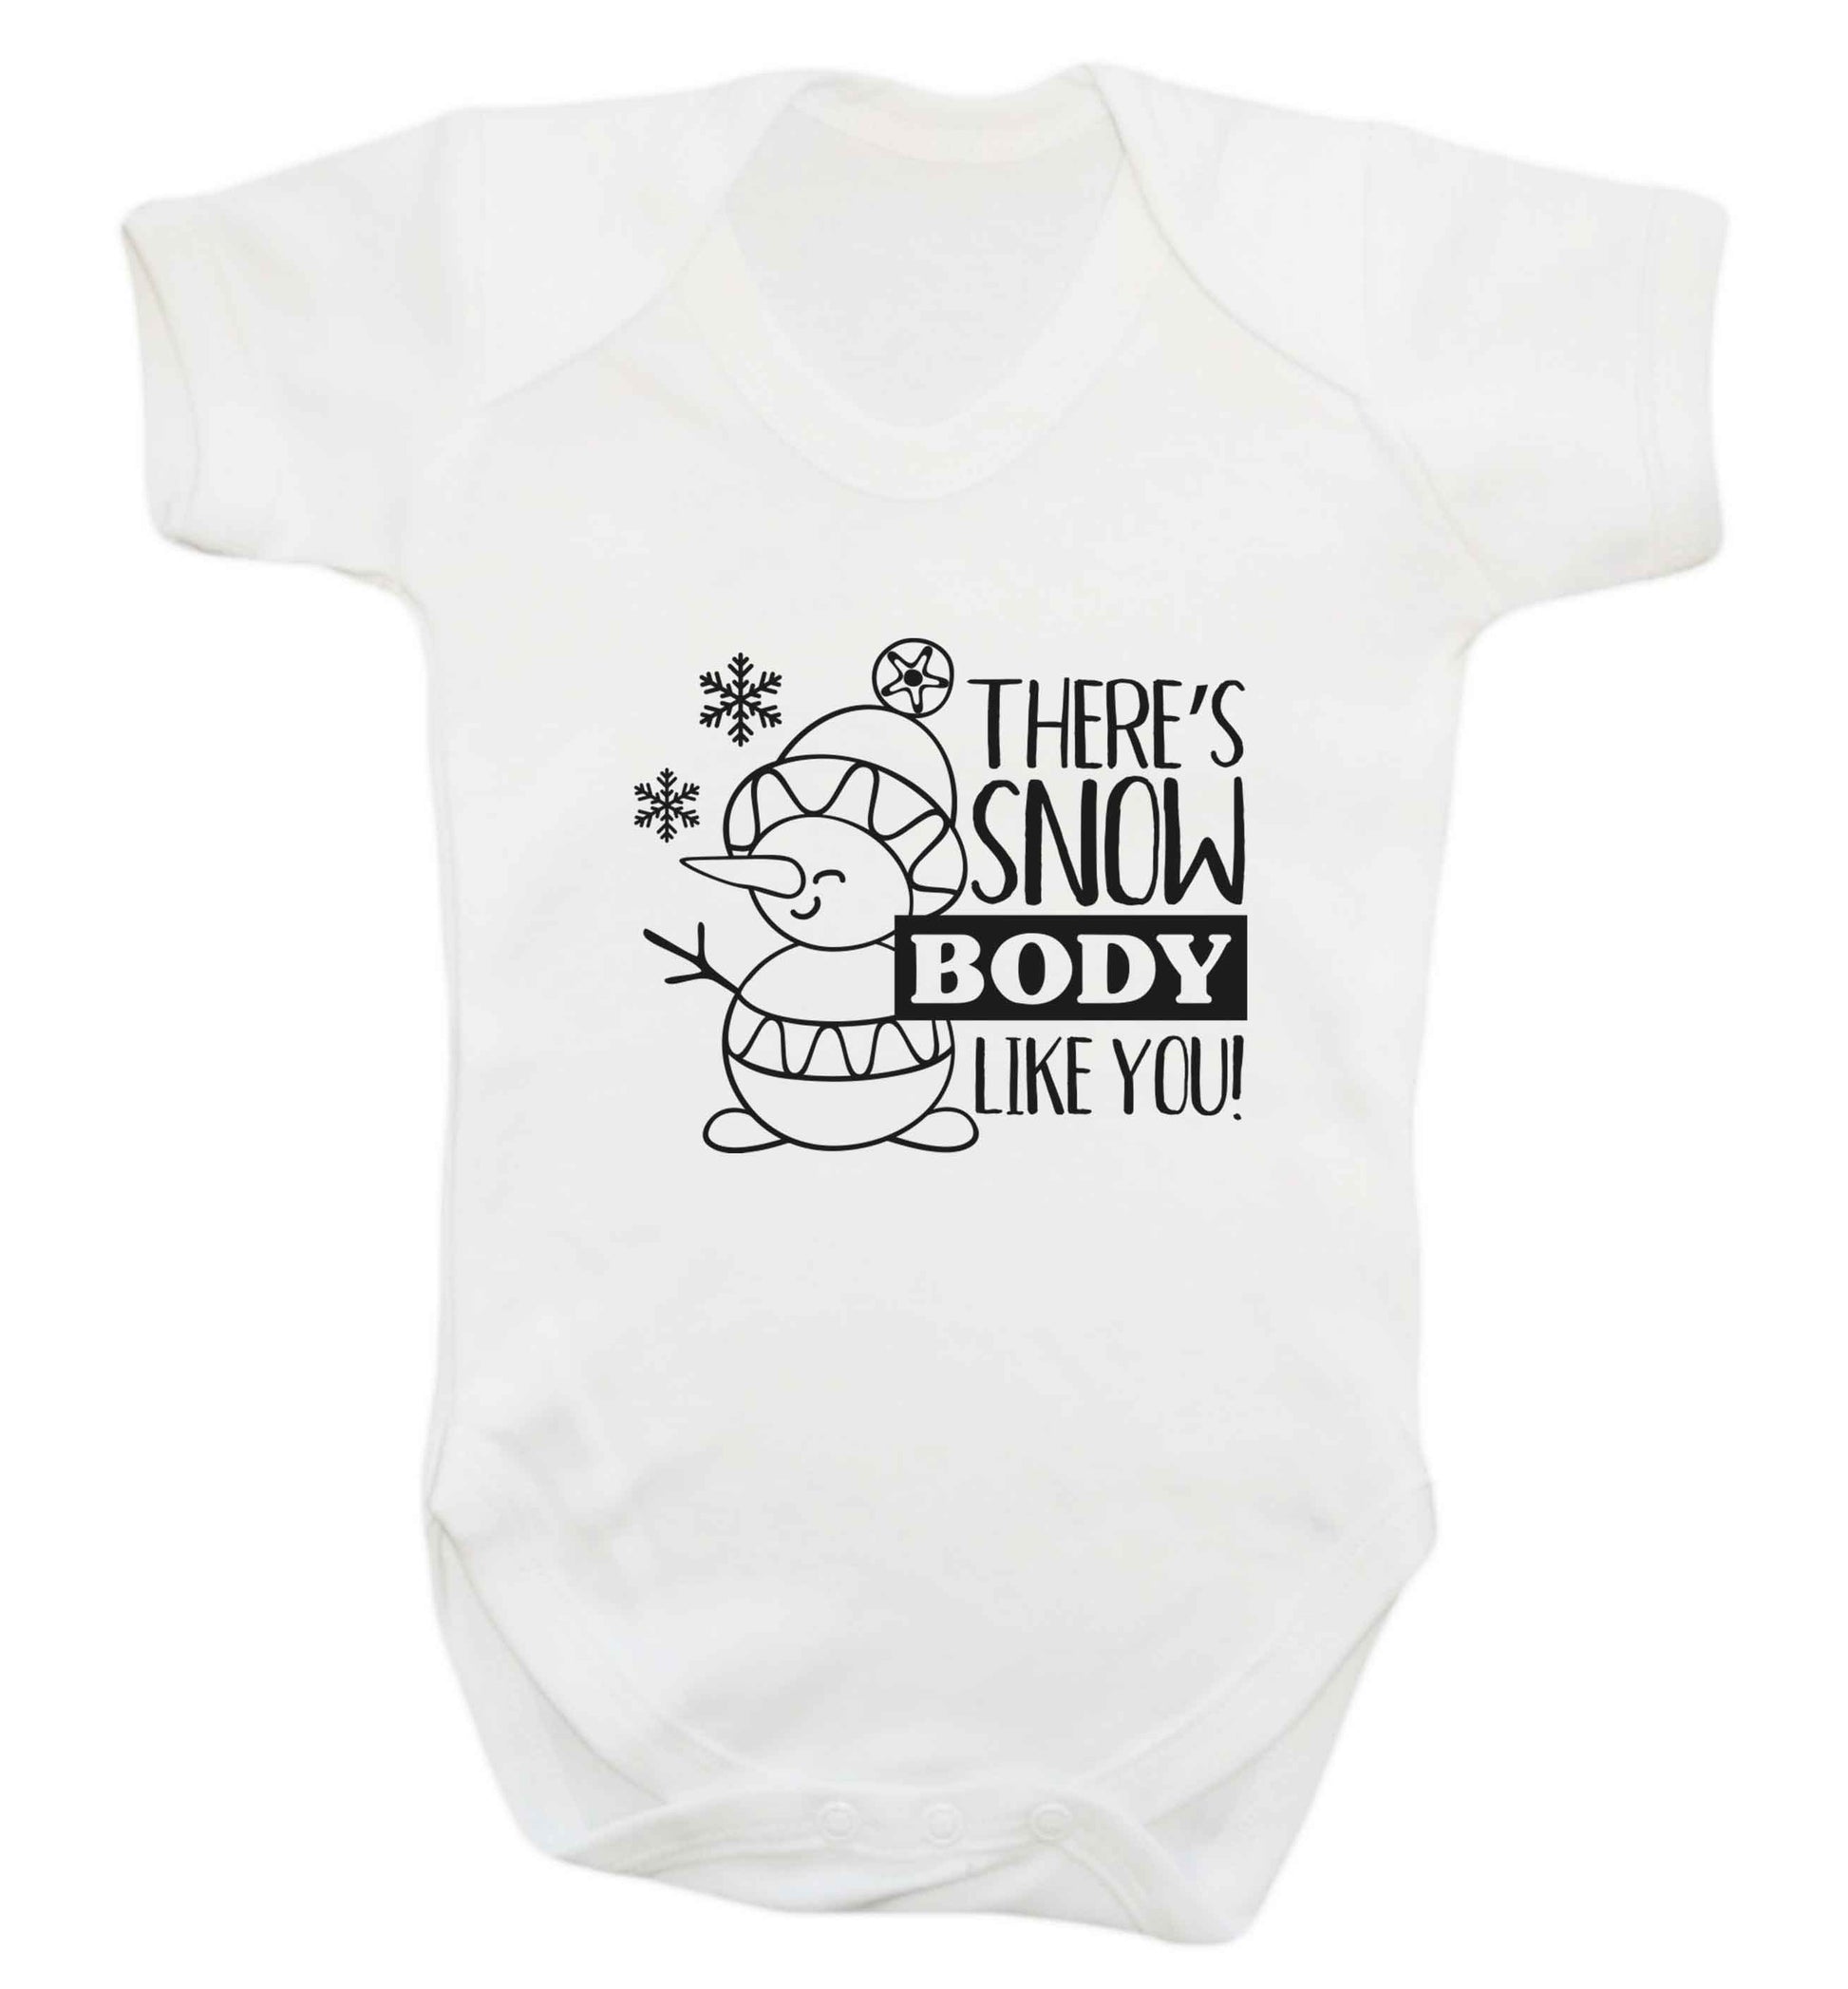 There's snow body like you baby vest white 18-24 months